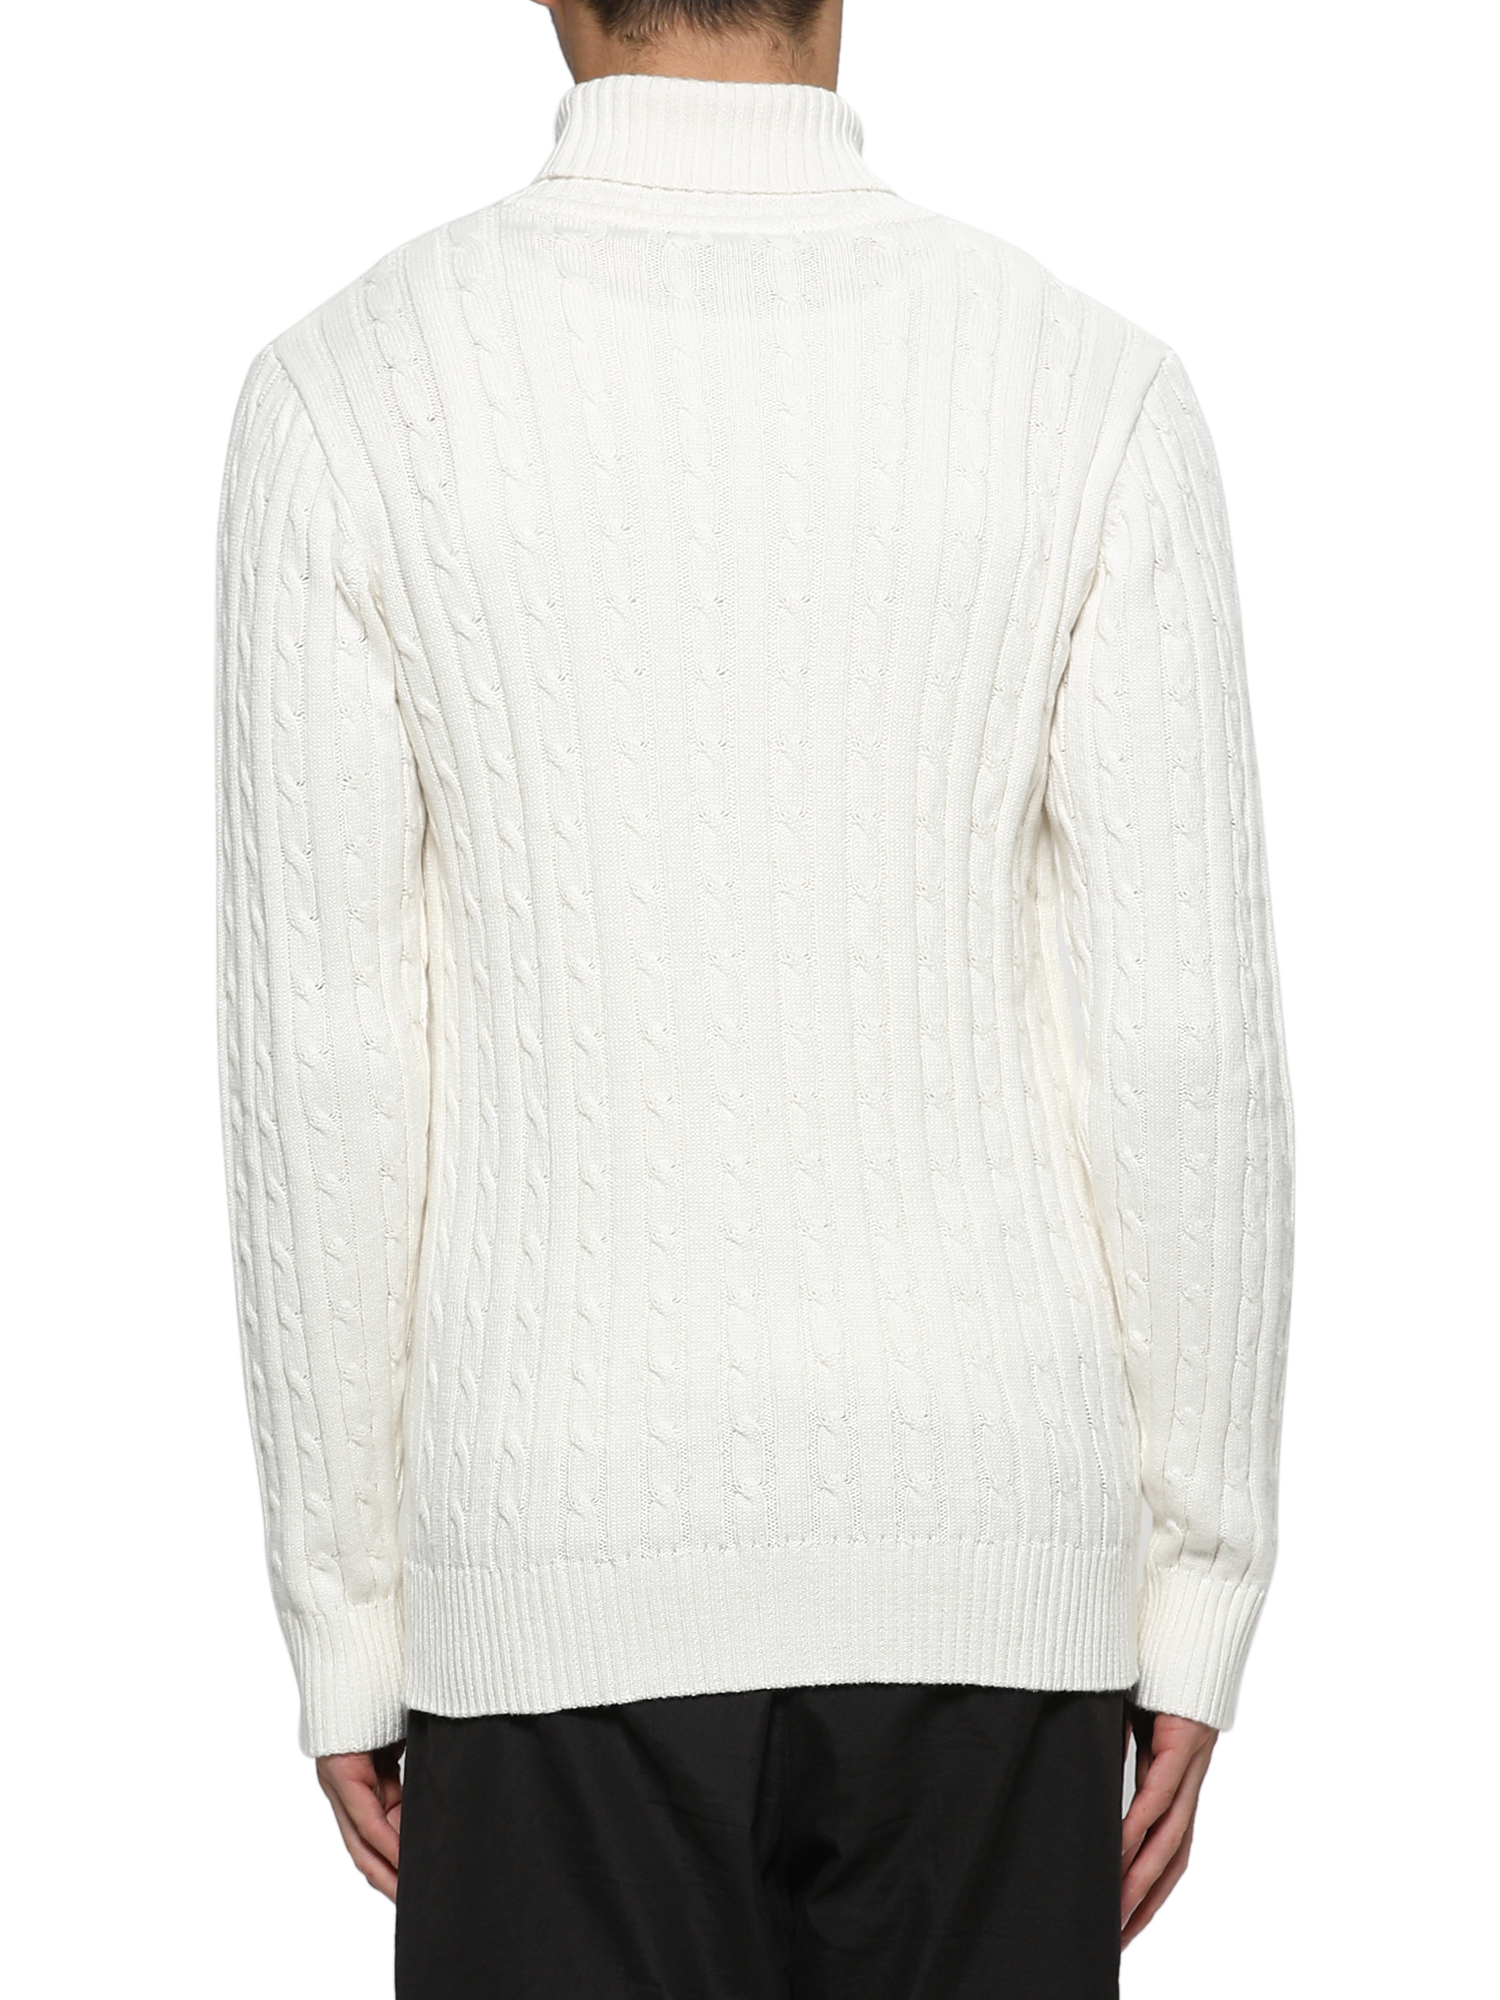 Unique Bargains Men's Turtleneck Long Sleeves Pullover Cable Knit Sweater - image 3 of 4